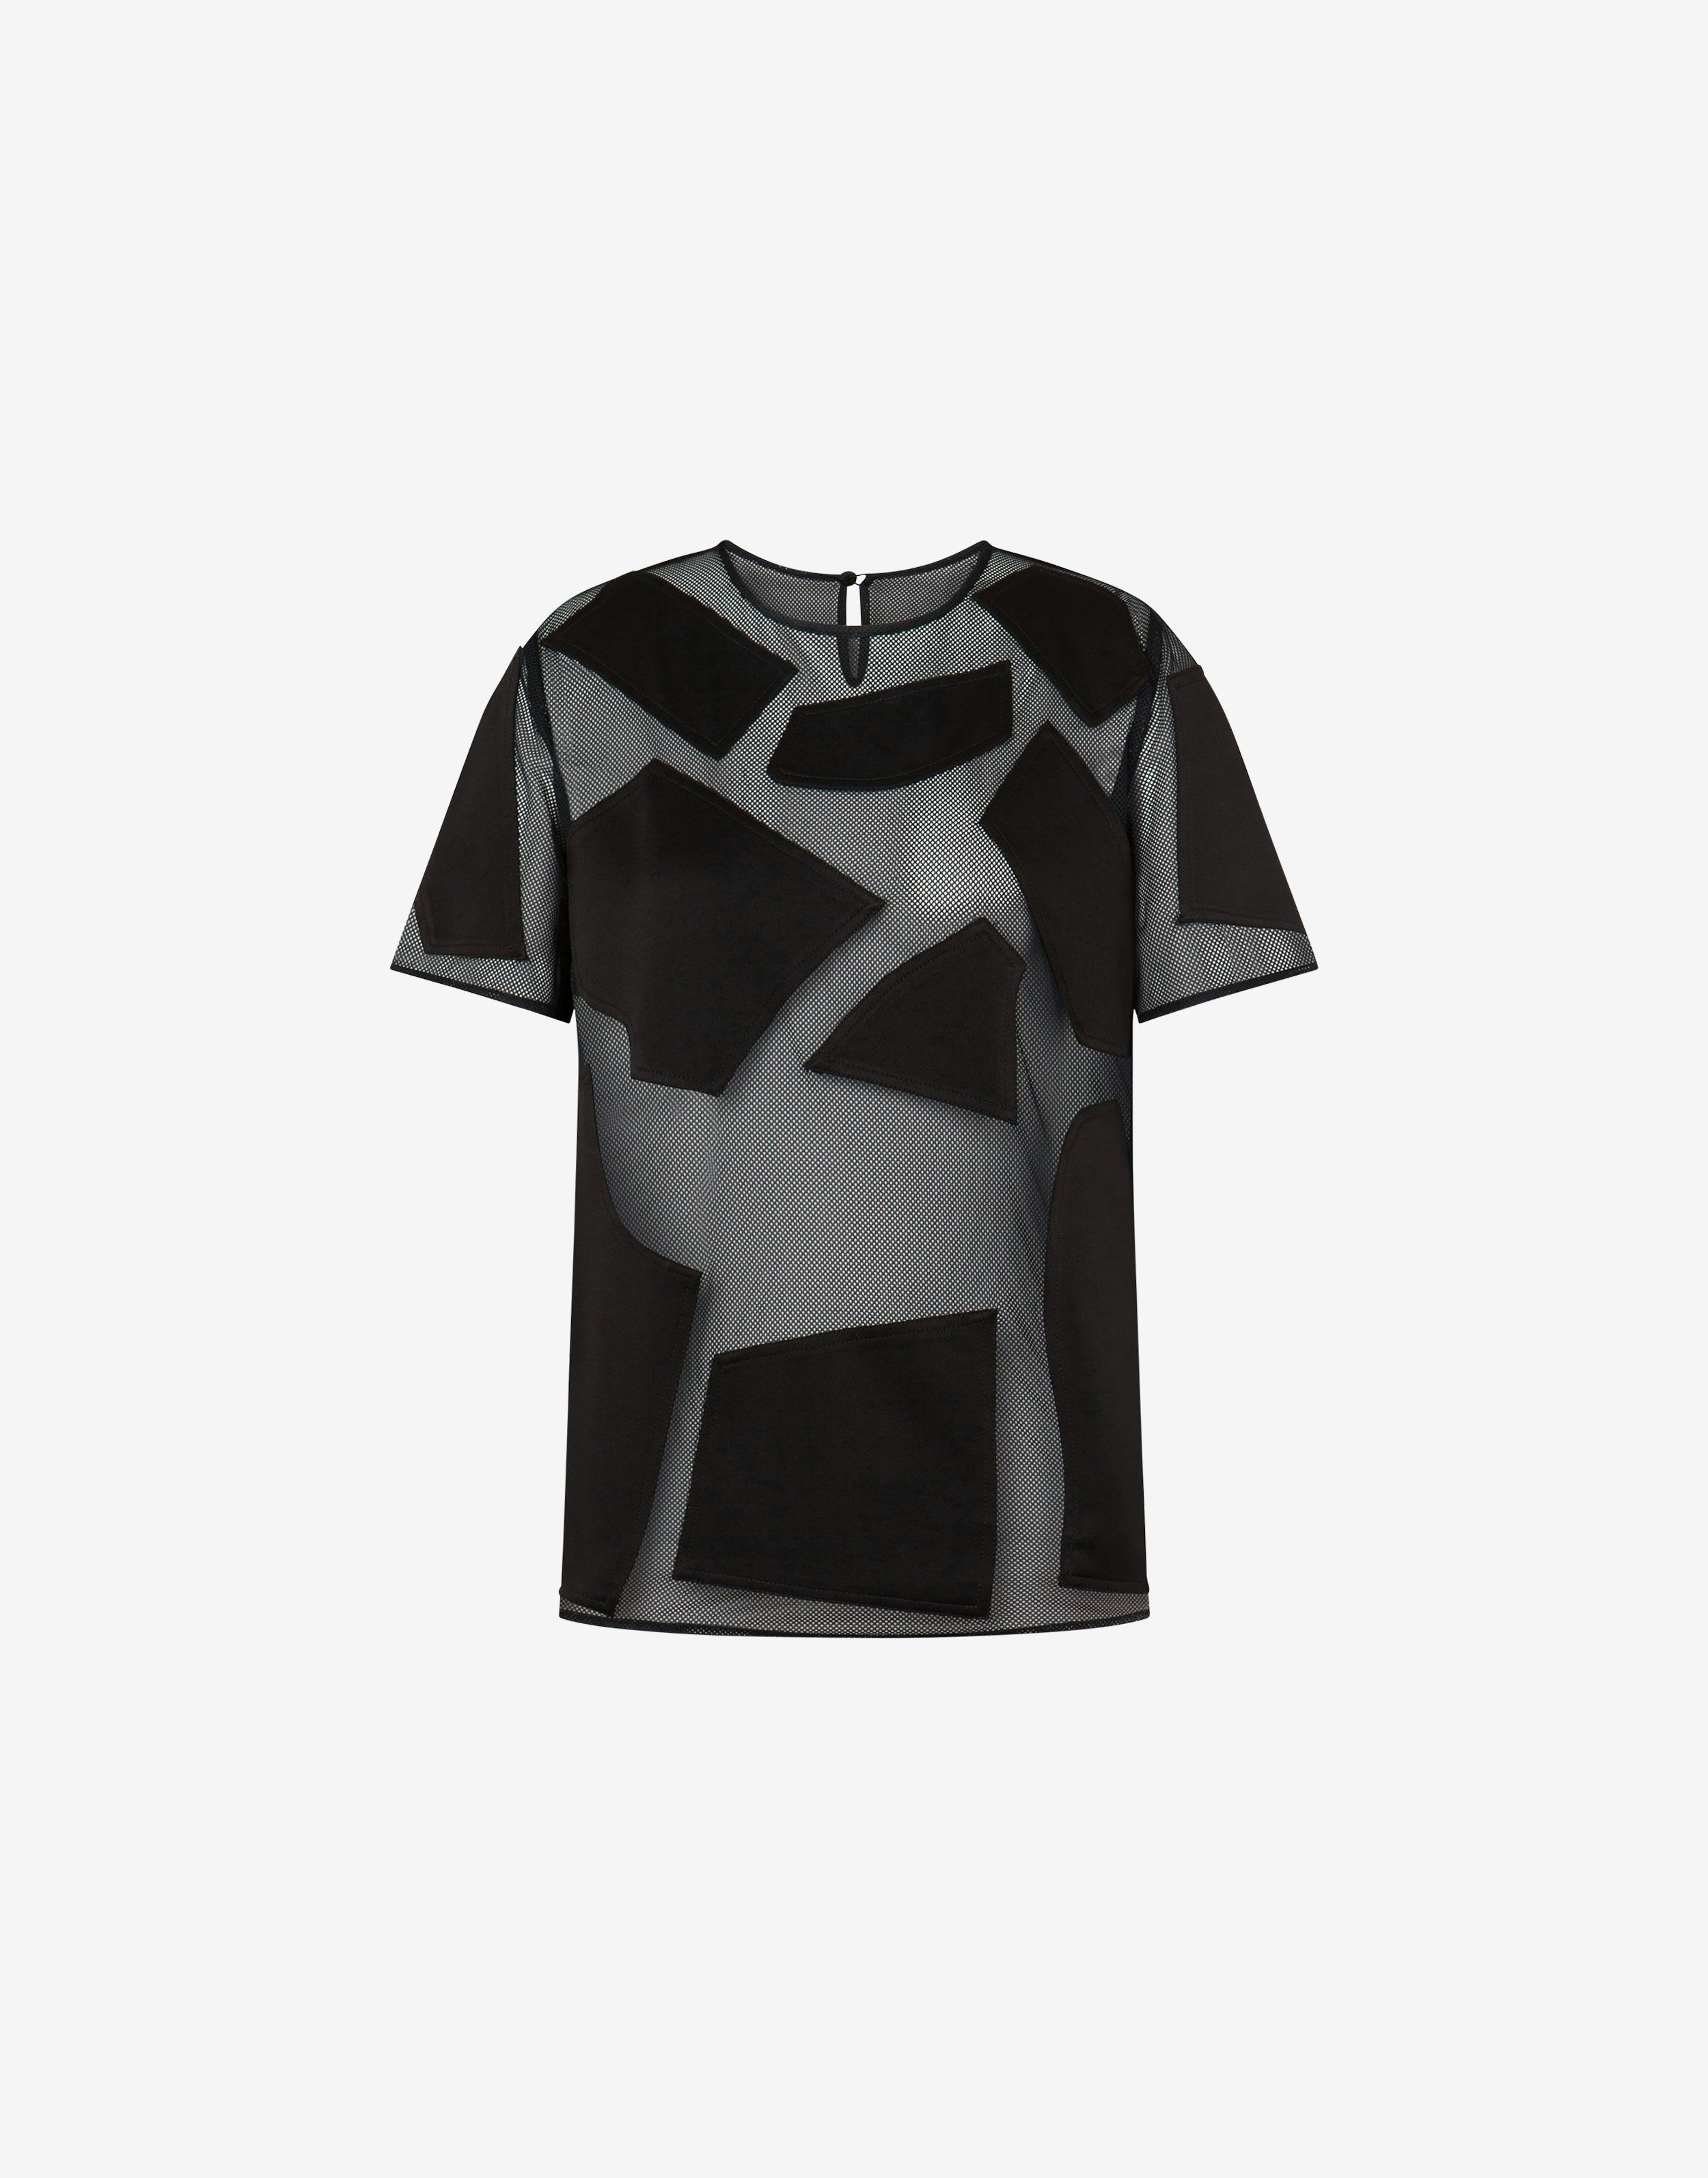 Mesh t-shirt with patches